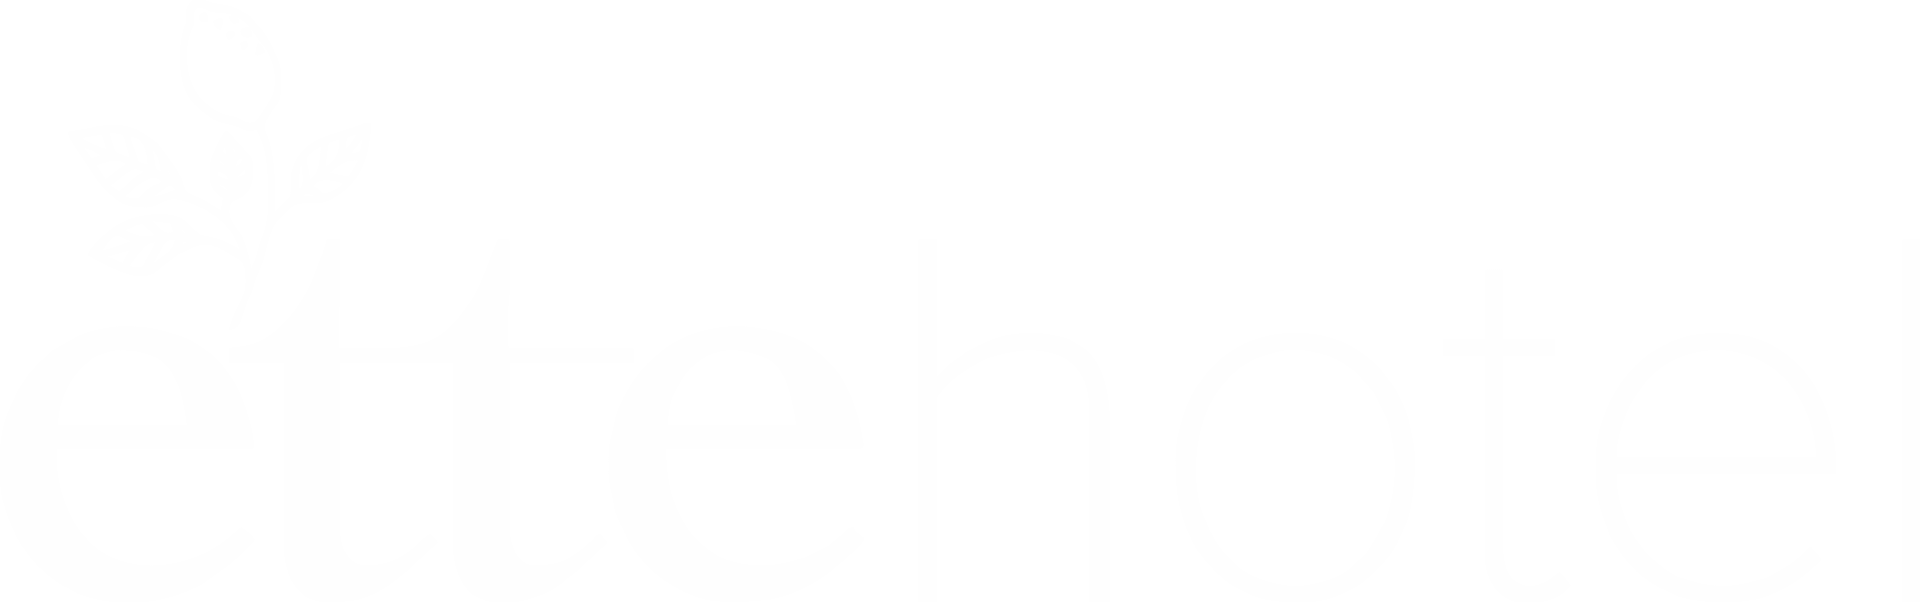 A black and white logo of the word " echo ".